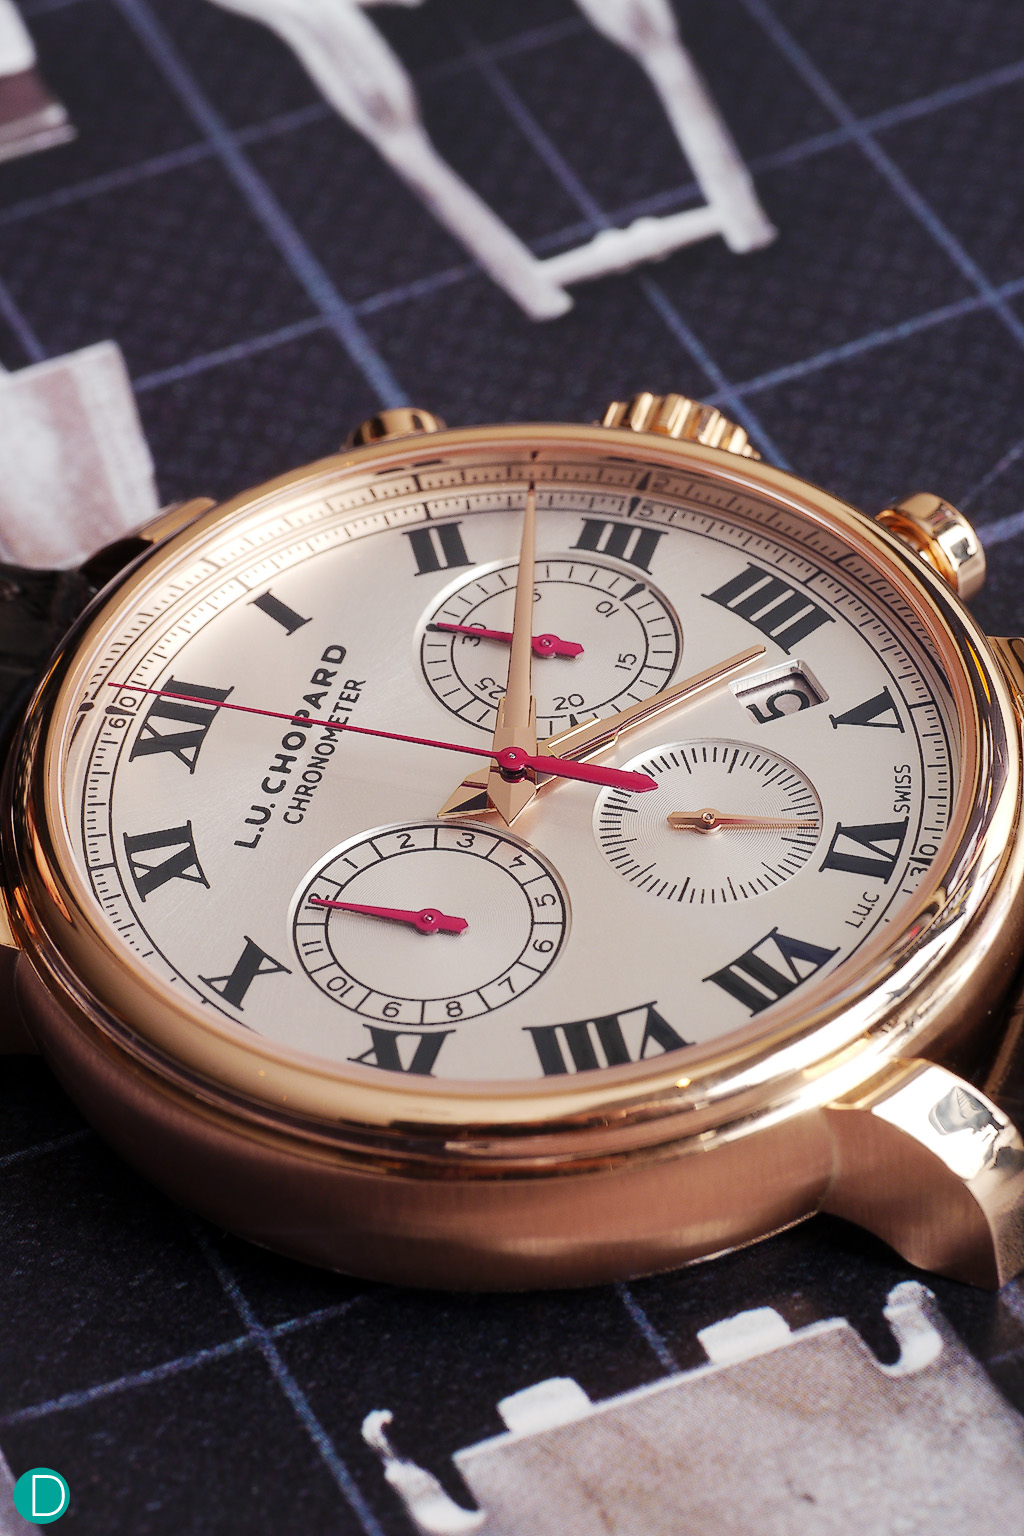 The Chopard LUC 1963 Chronograph. Hand wound, flyback chronograph.